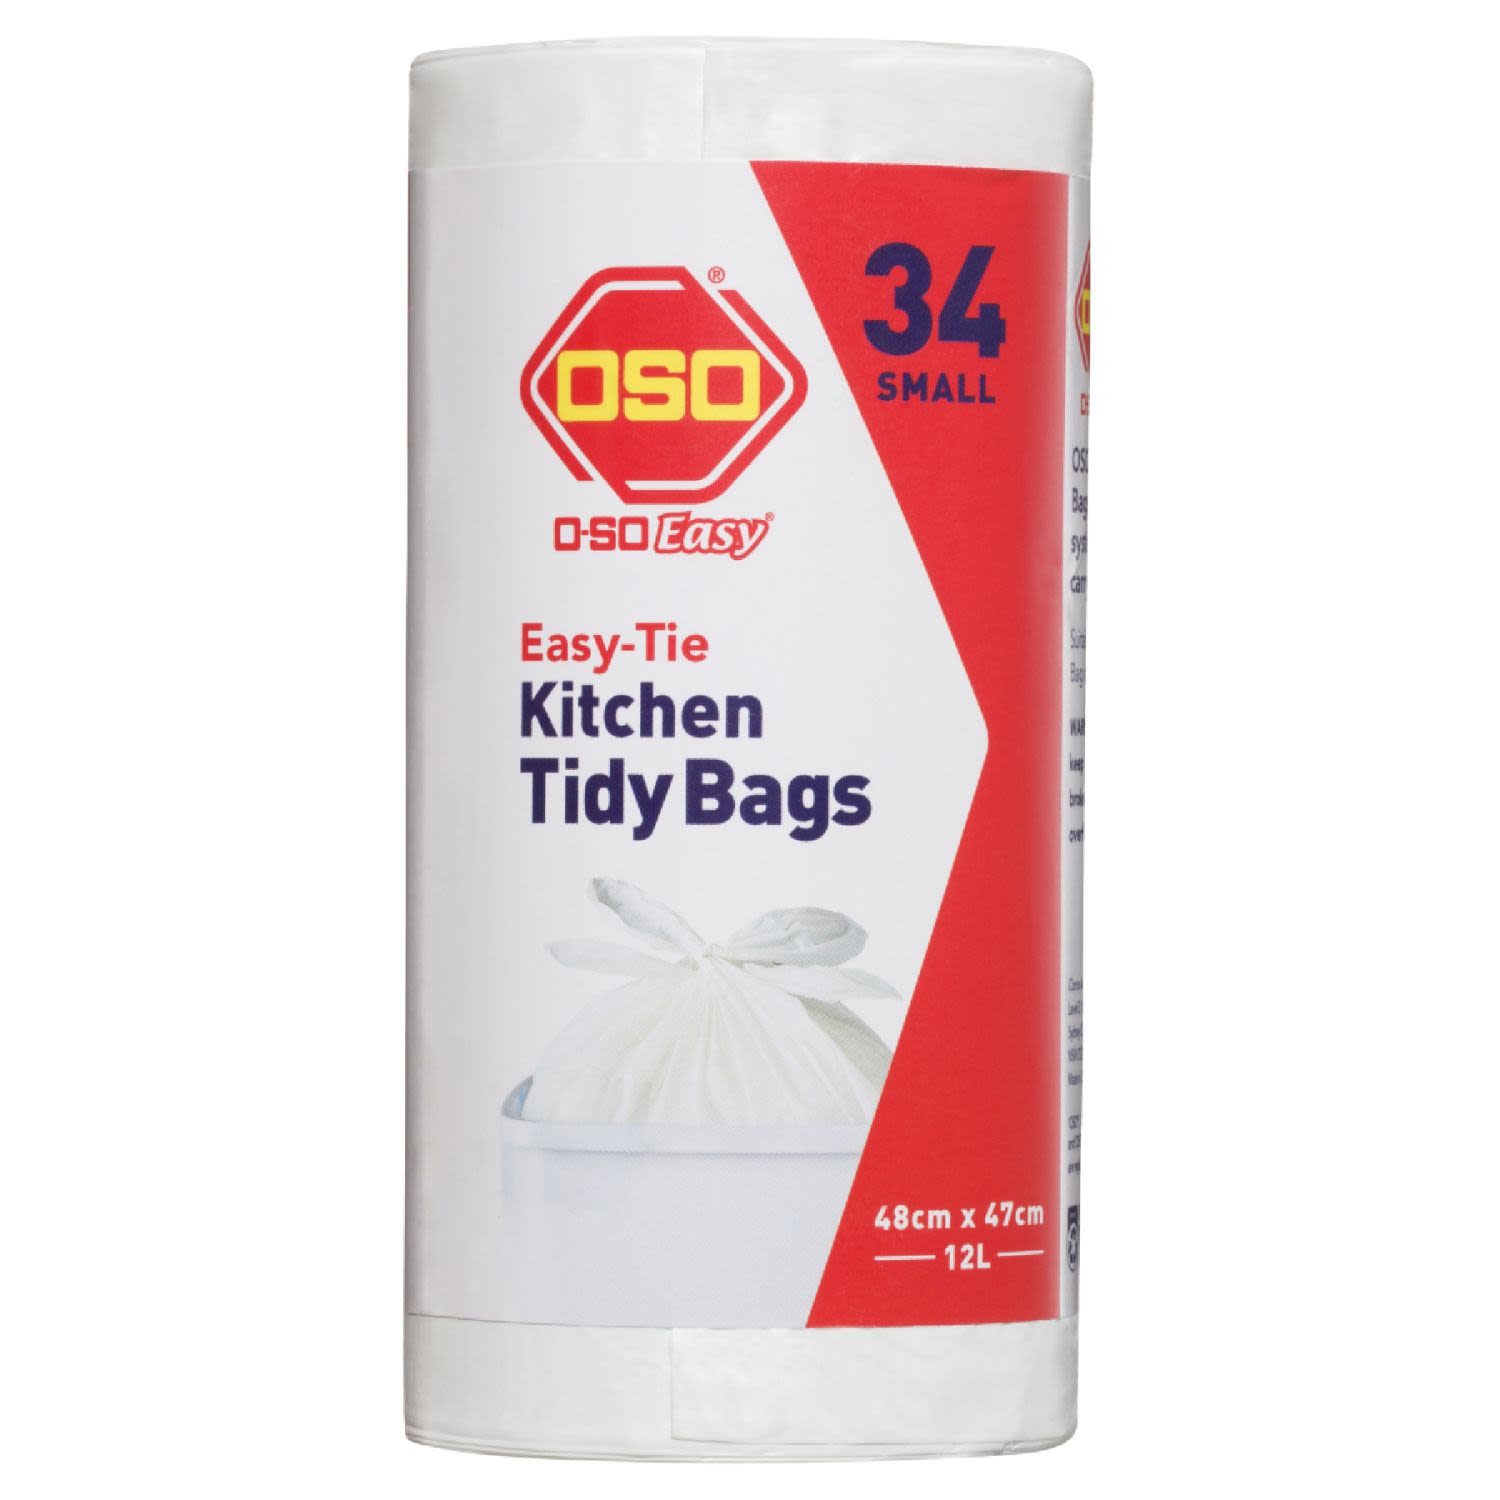 Oso Easy-Tie Kitchen Tidy Bags Small, 34 Each